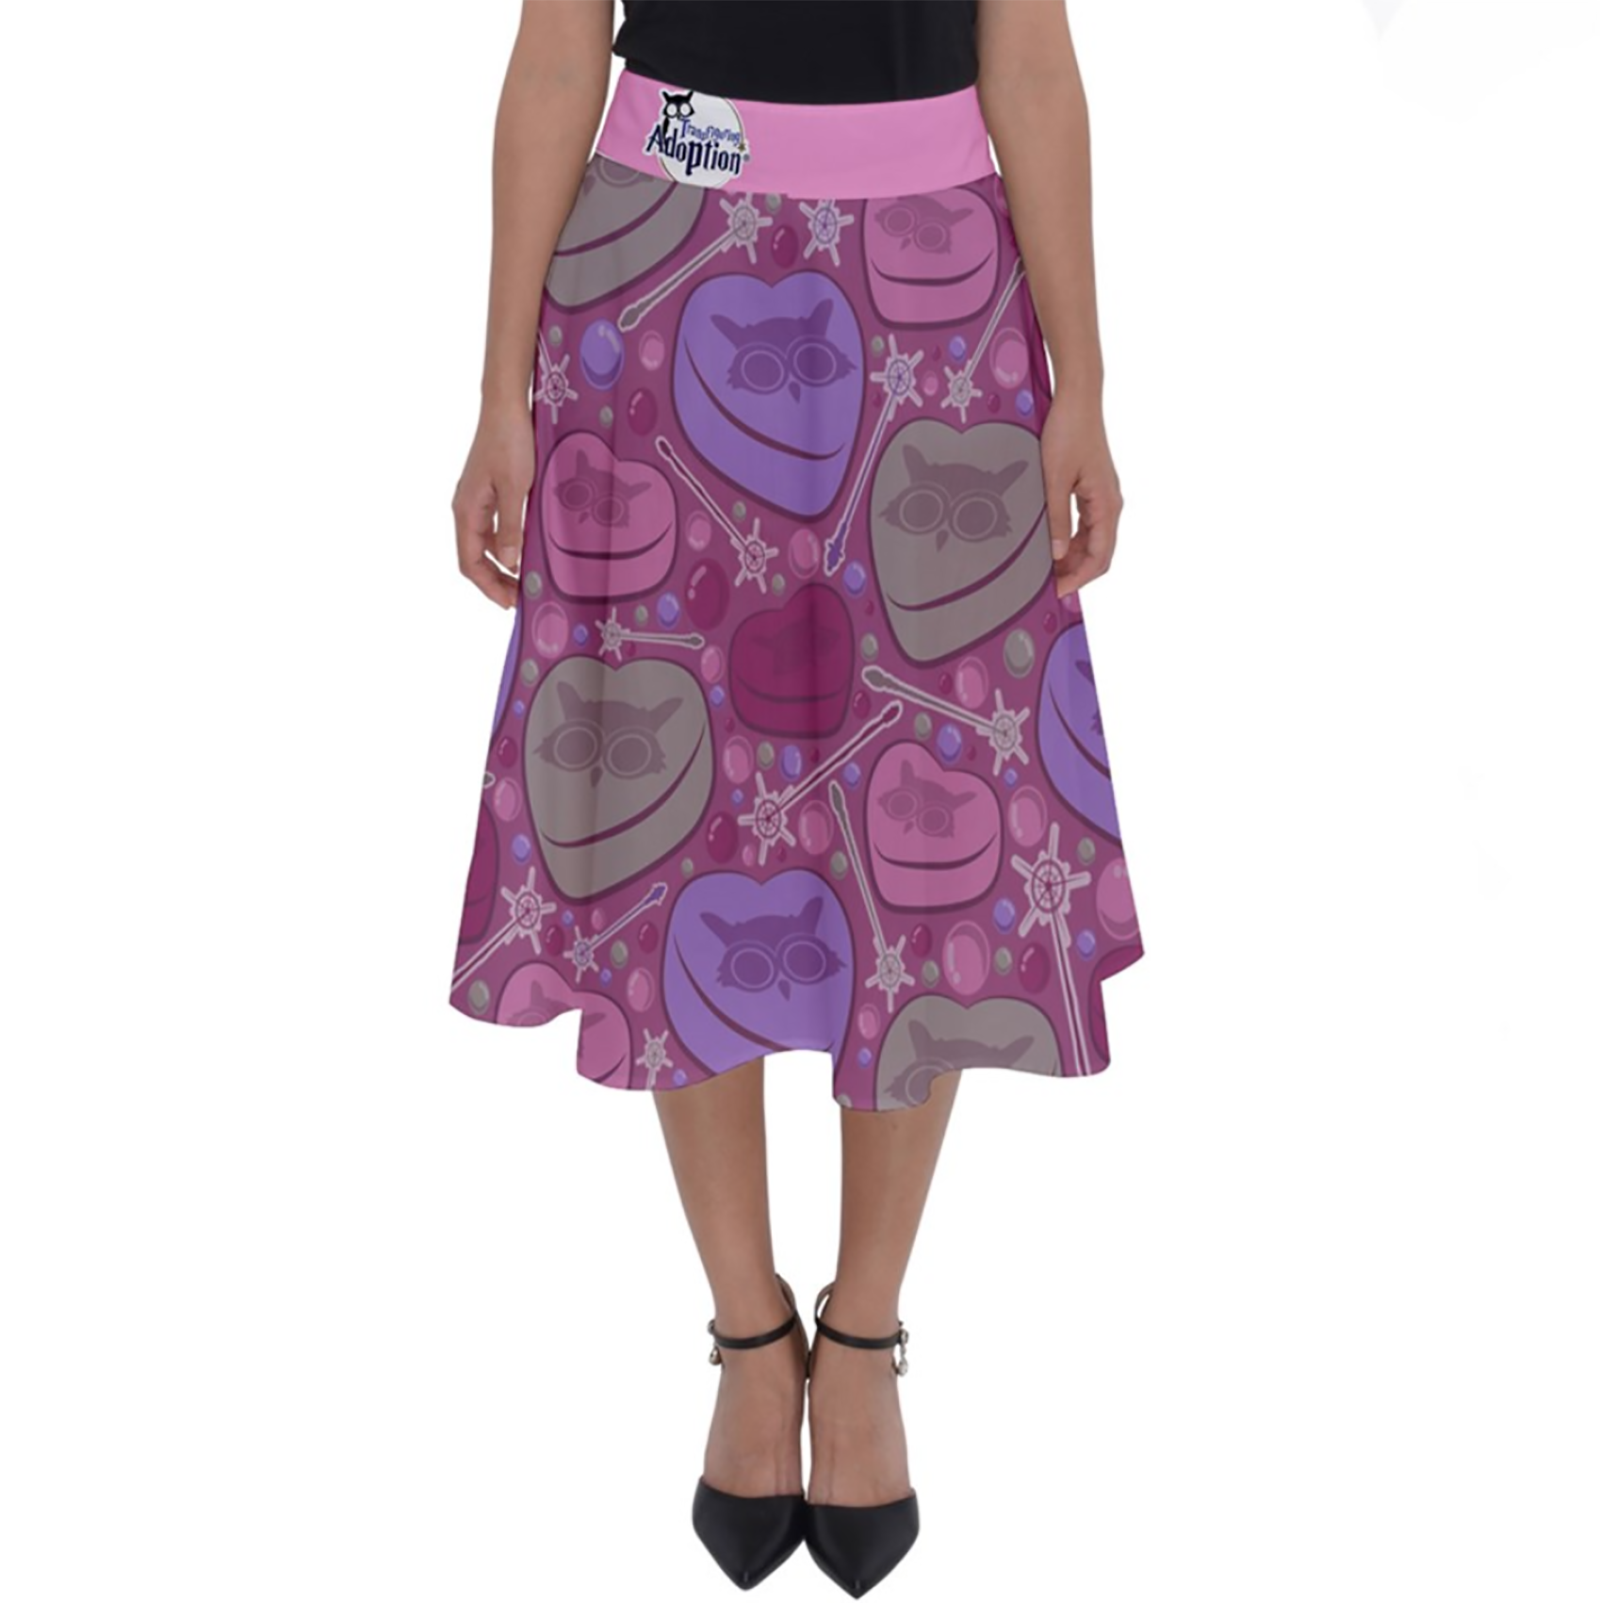 Charmed Perfect Length Midi Skirt (Pink Patterned)